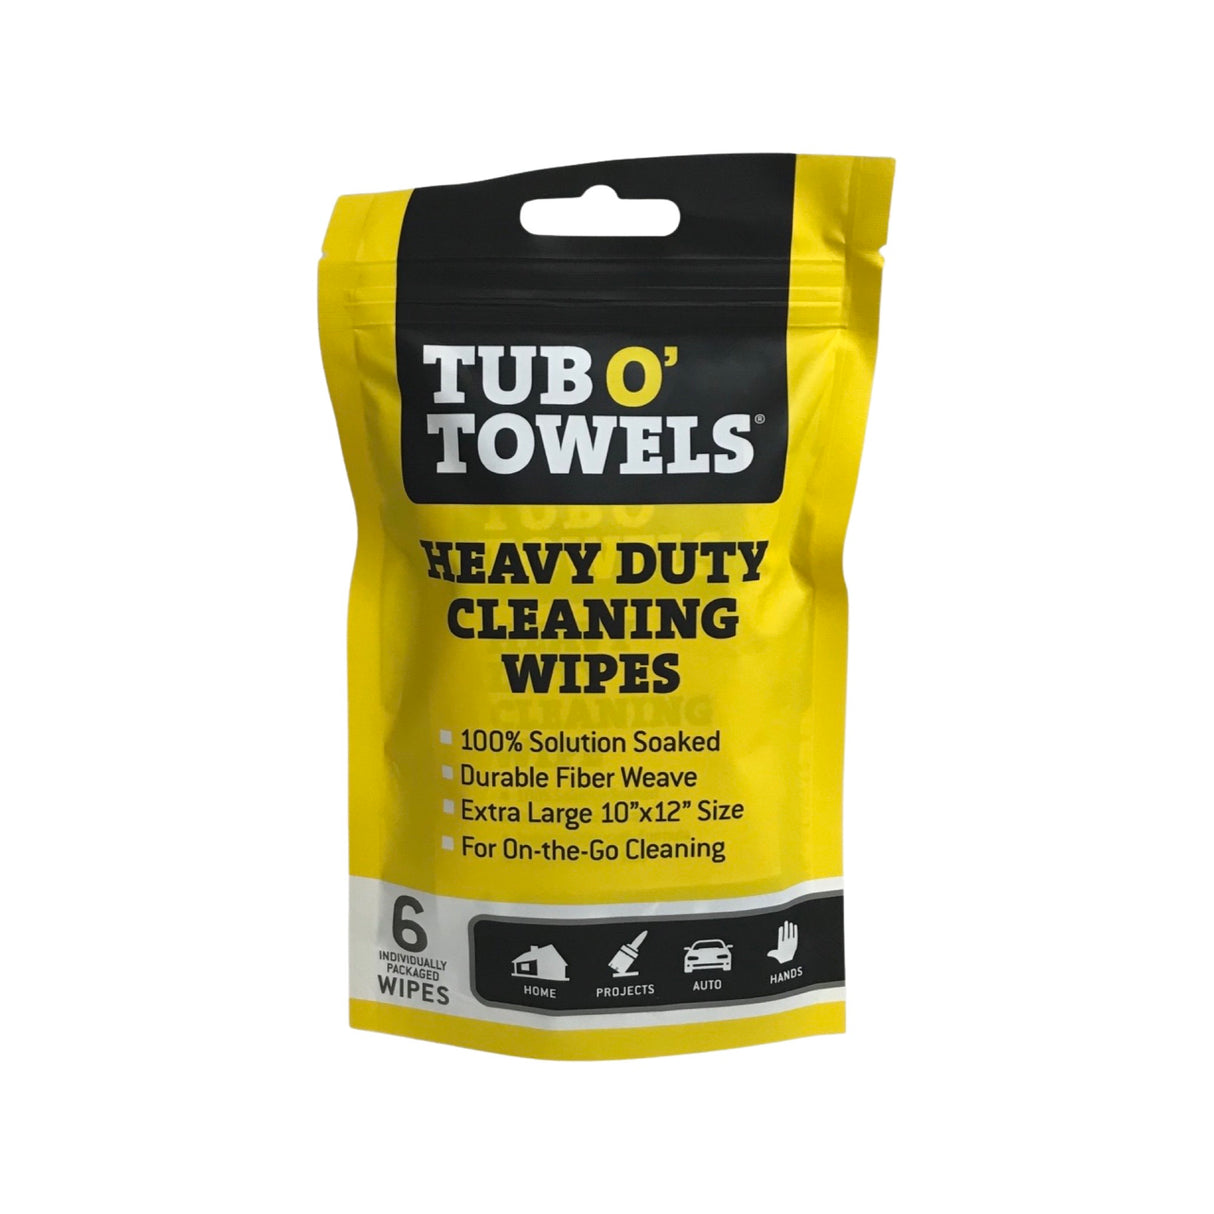 Tub O' Towels TW01-6 - Heavy Duty Multi-Surface Cleaning Wipes - Resealable